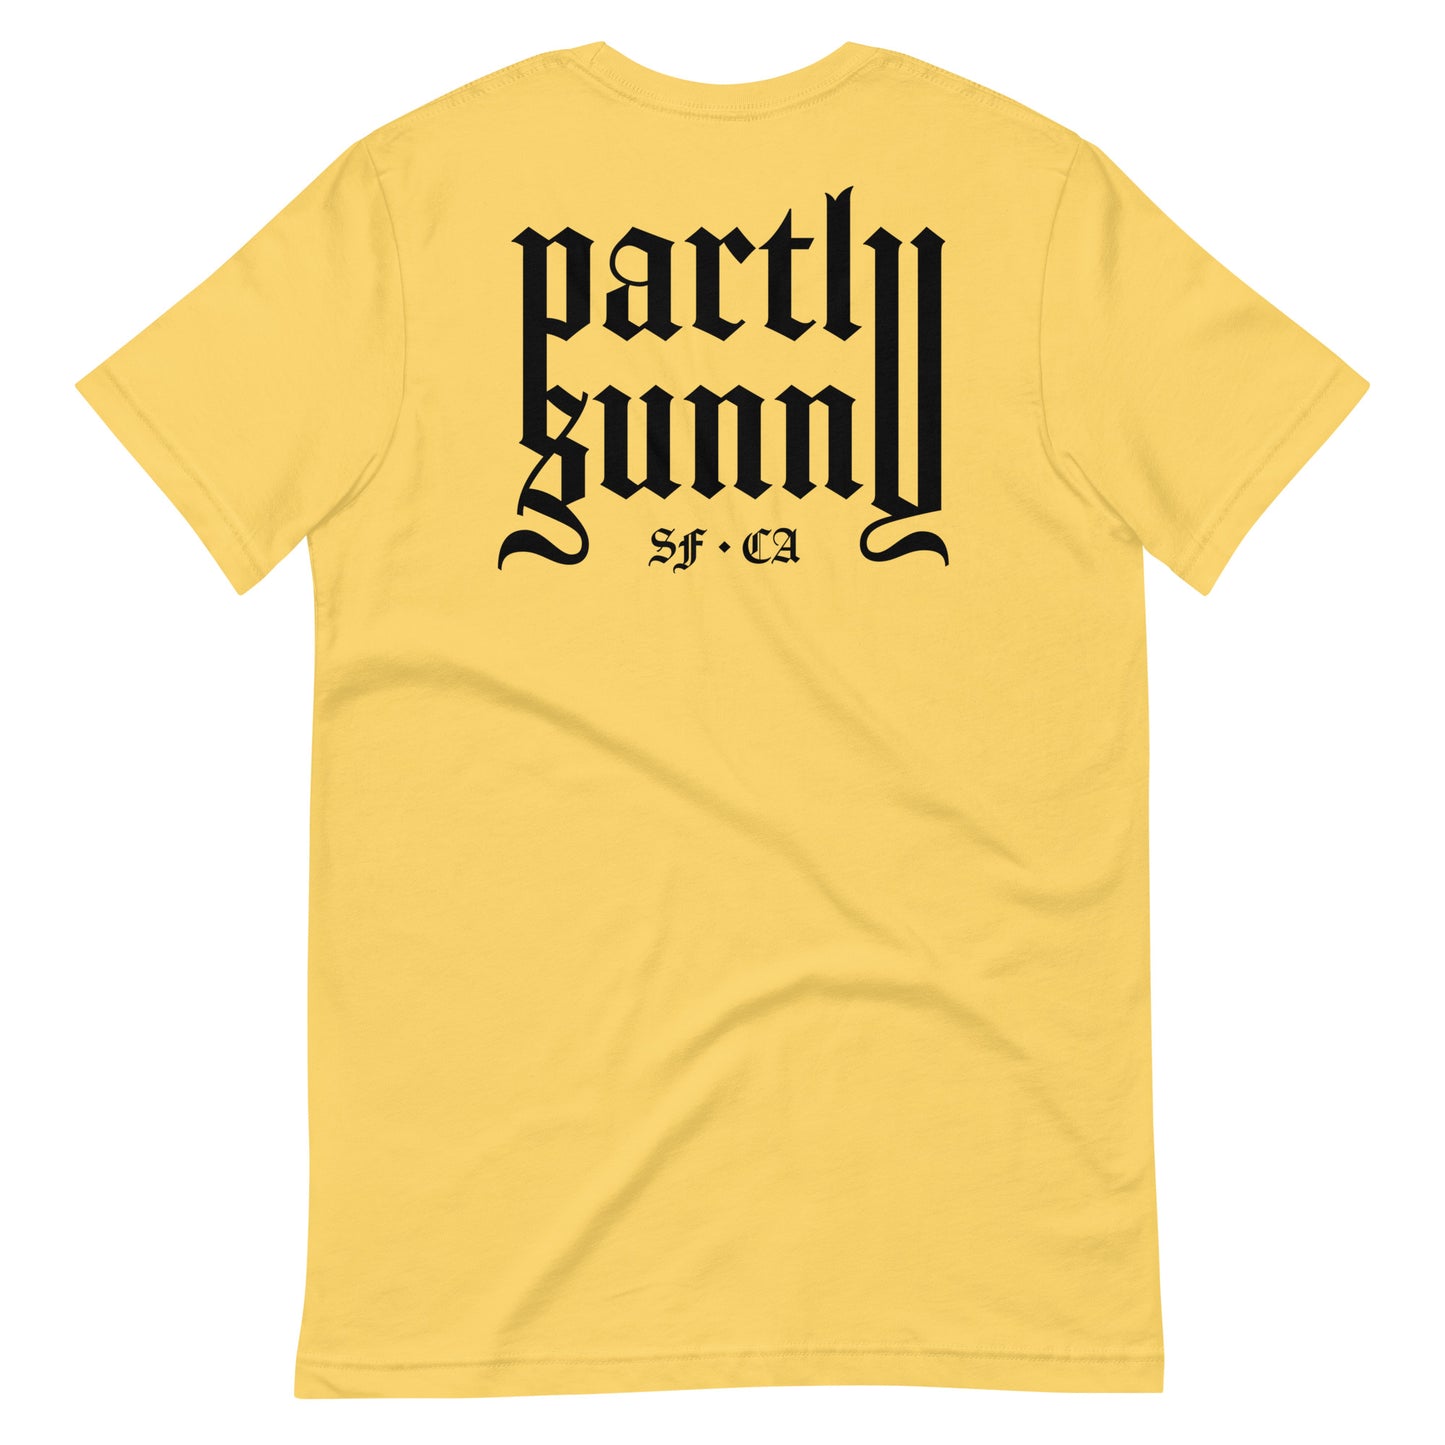 Partly Sunny Old E Tee 1